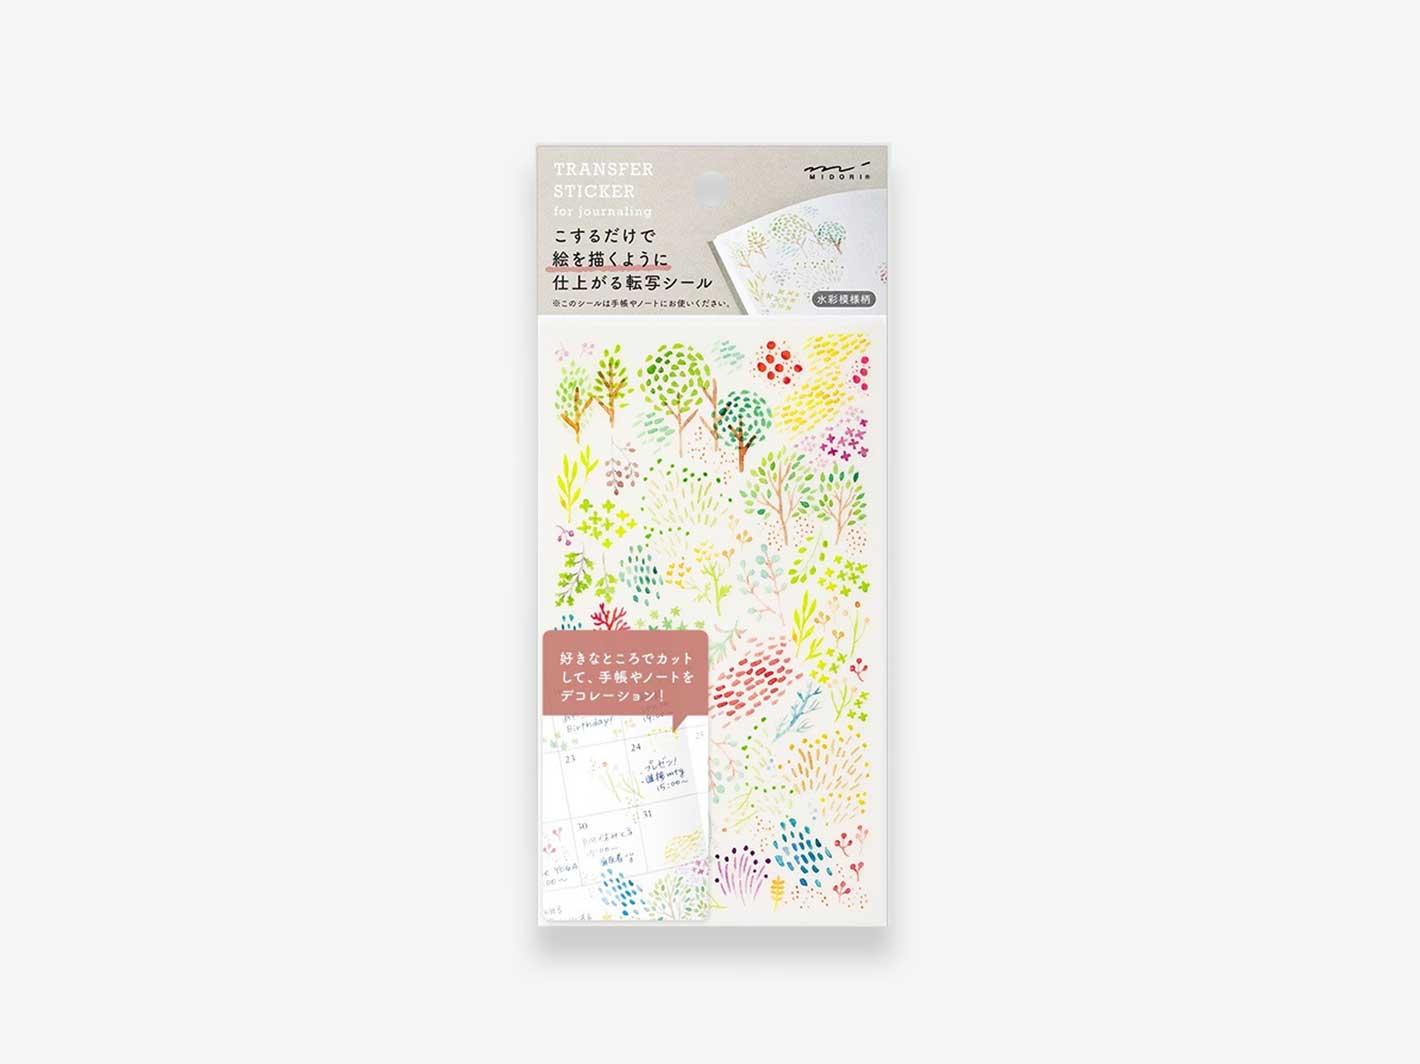 Transfer Stickers - Watercolor Patterns